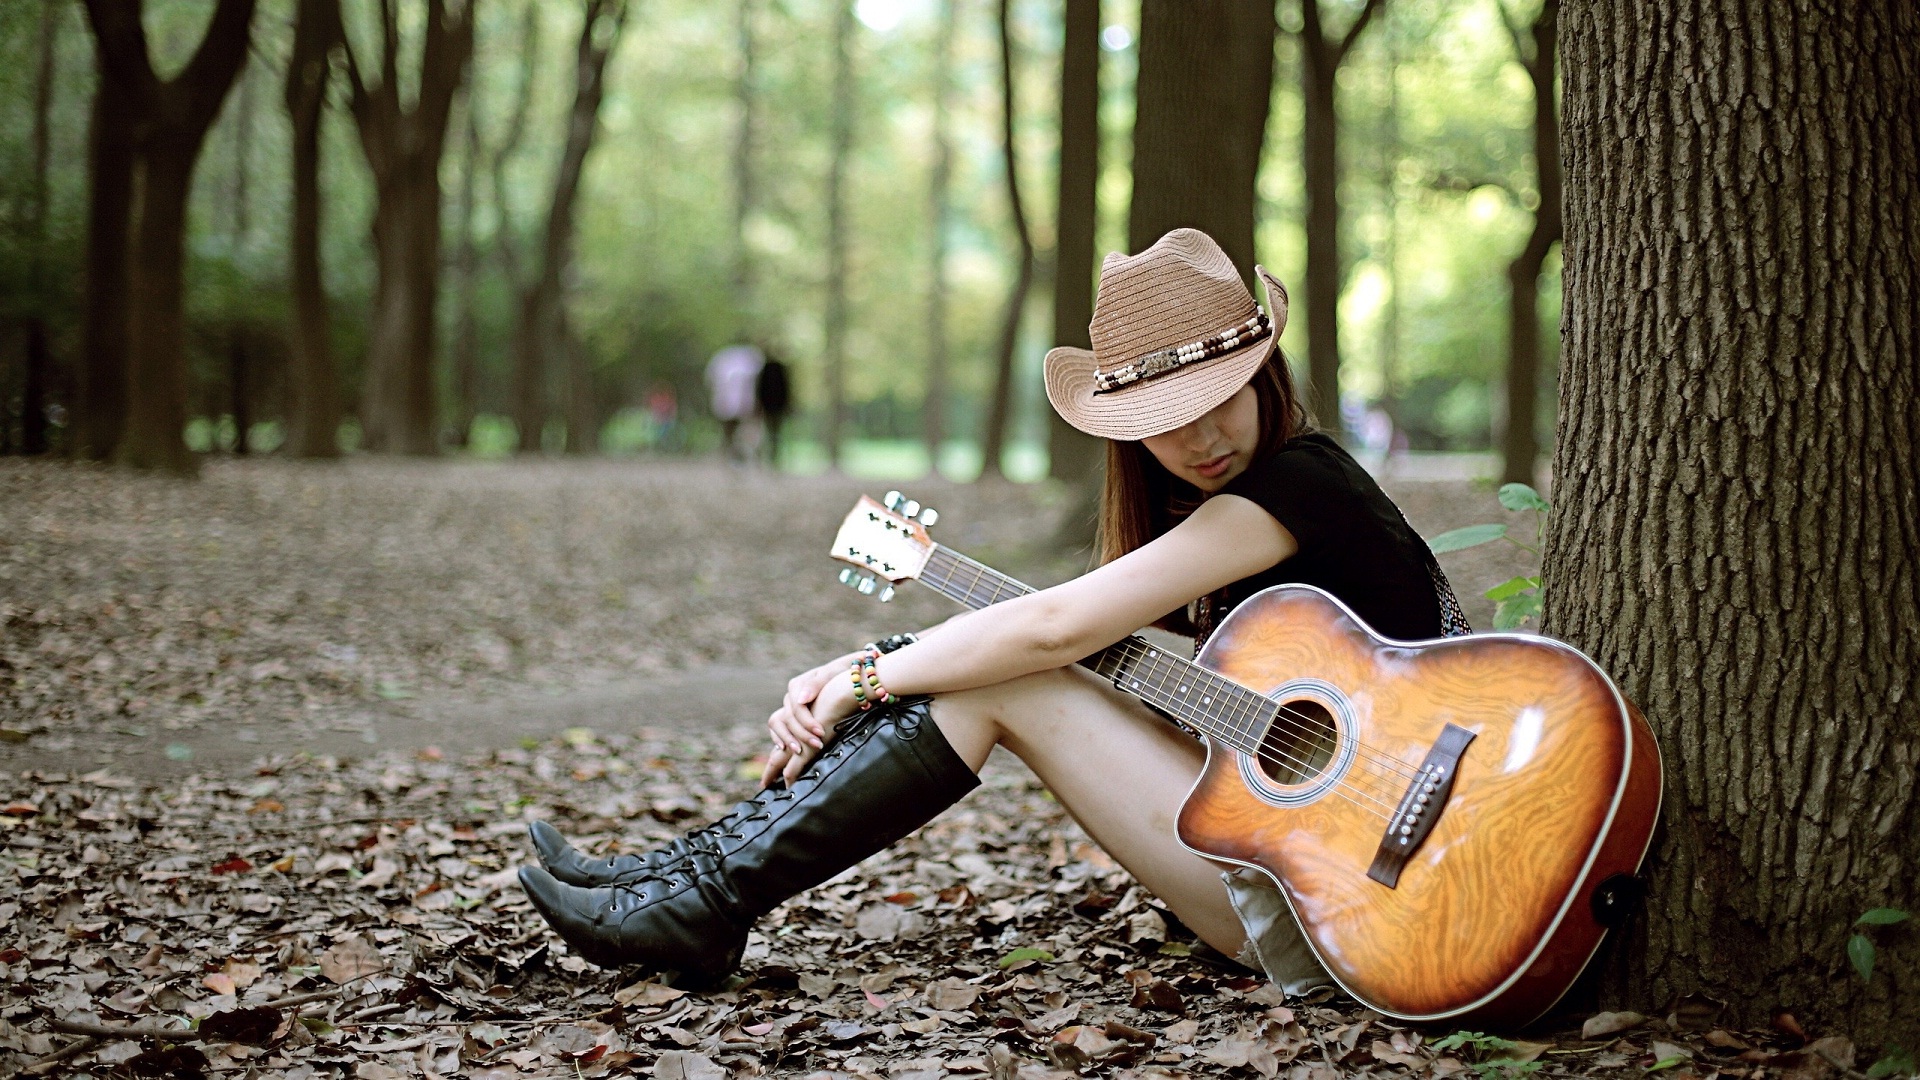 Sad girl with guitar lonely in jungle HD Wallpapers Rocks